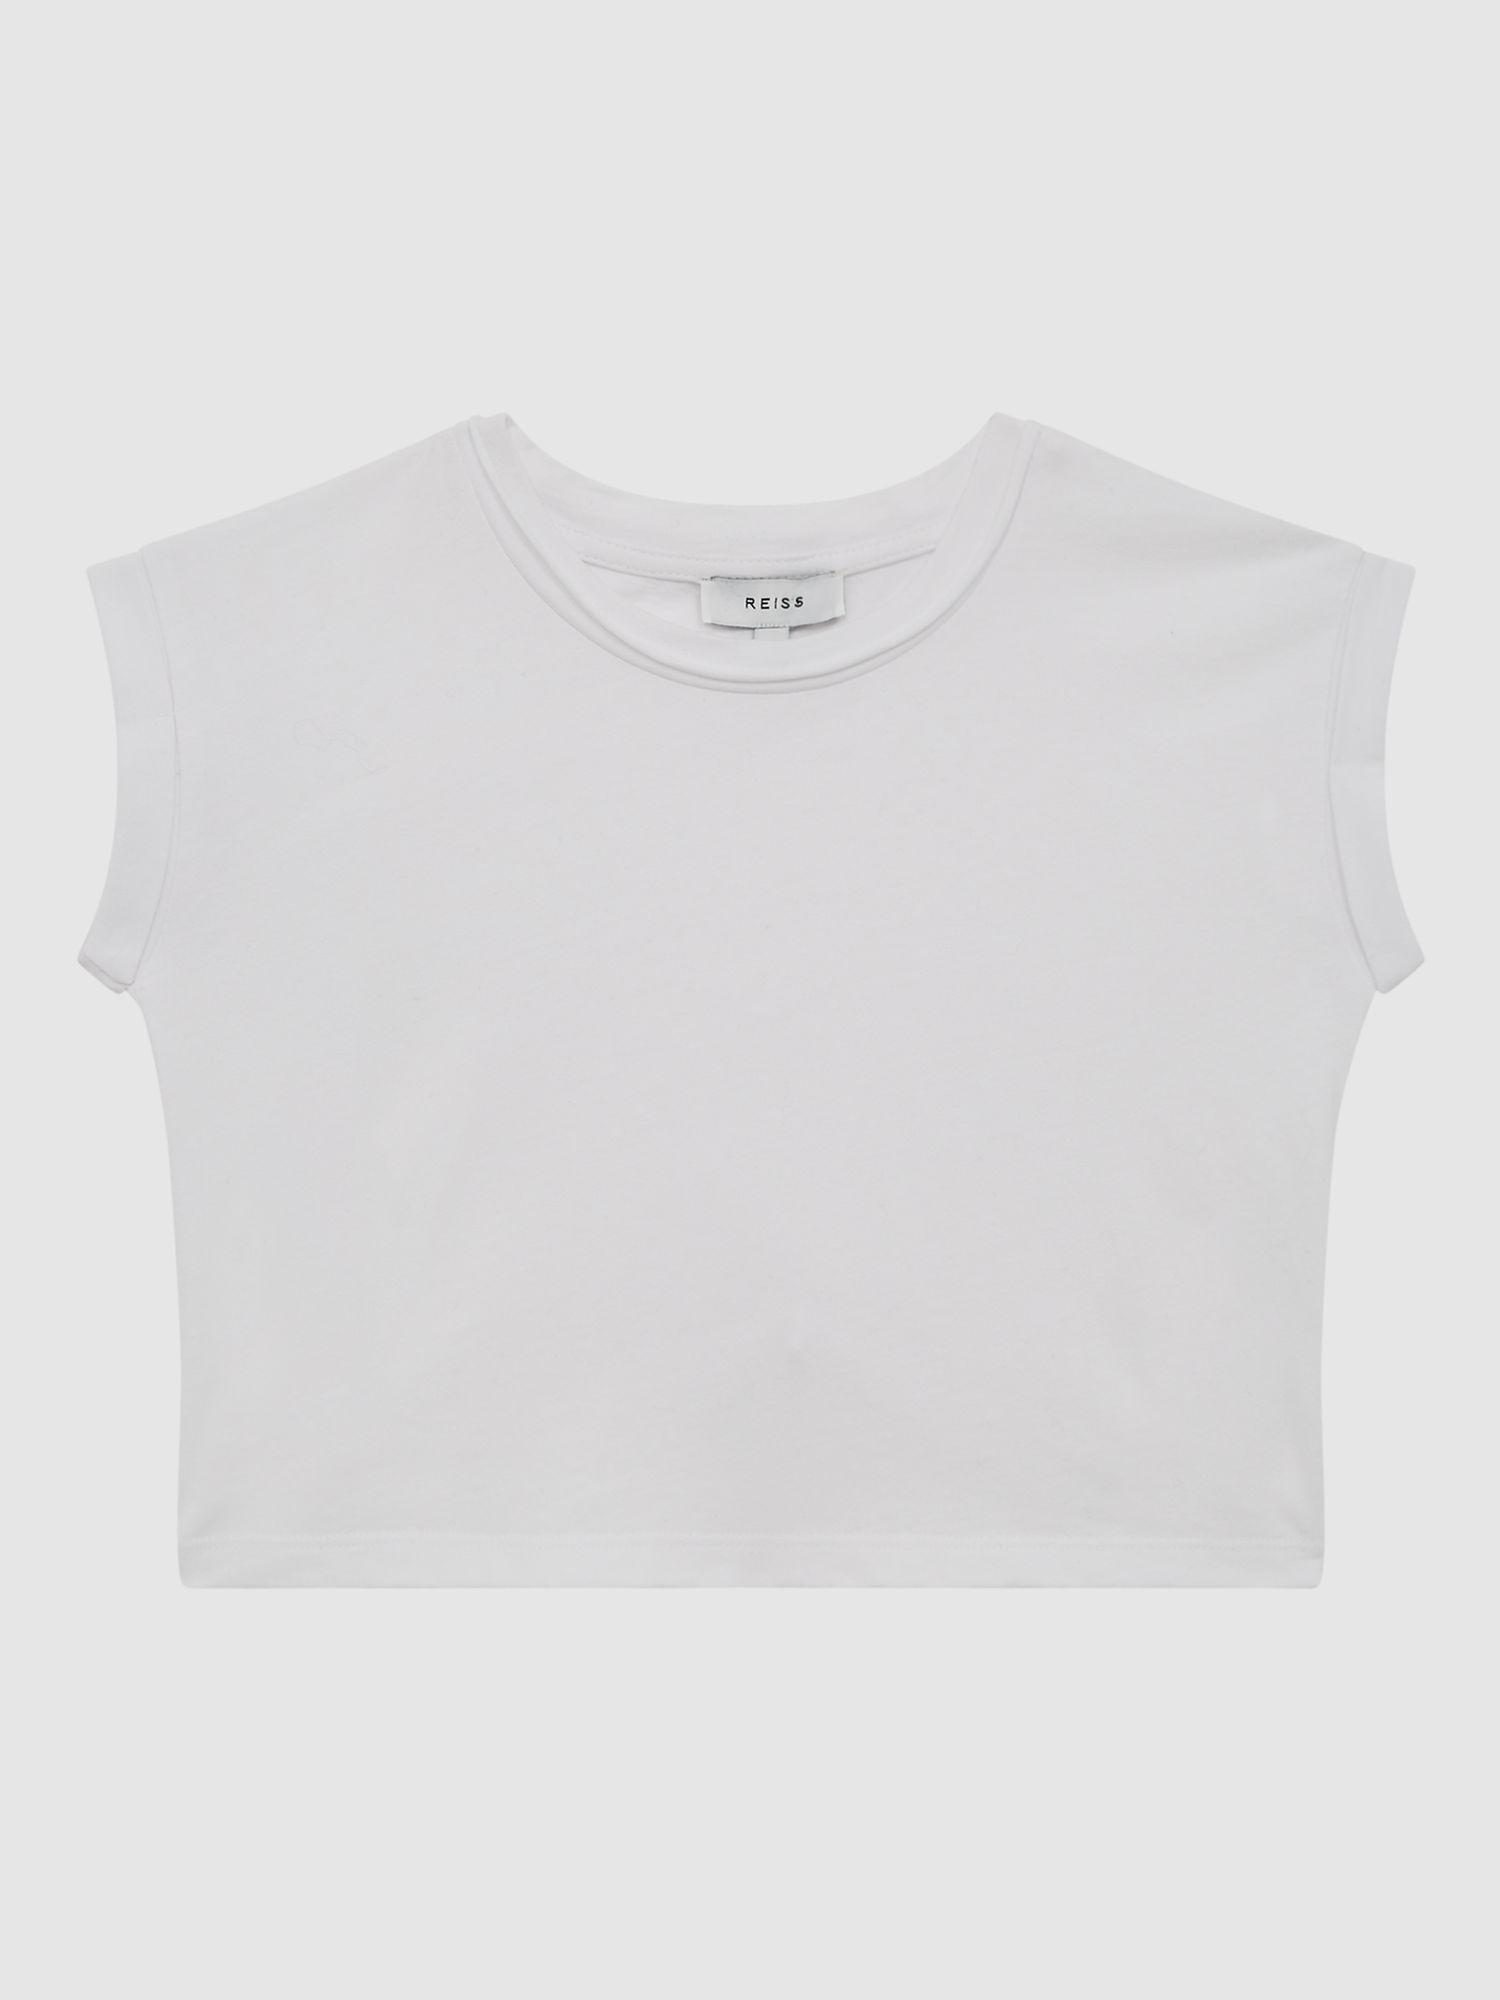 Reiss Kids' Terry Cotton Cropped T-Shirt, White, 5-6 years